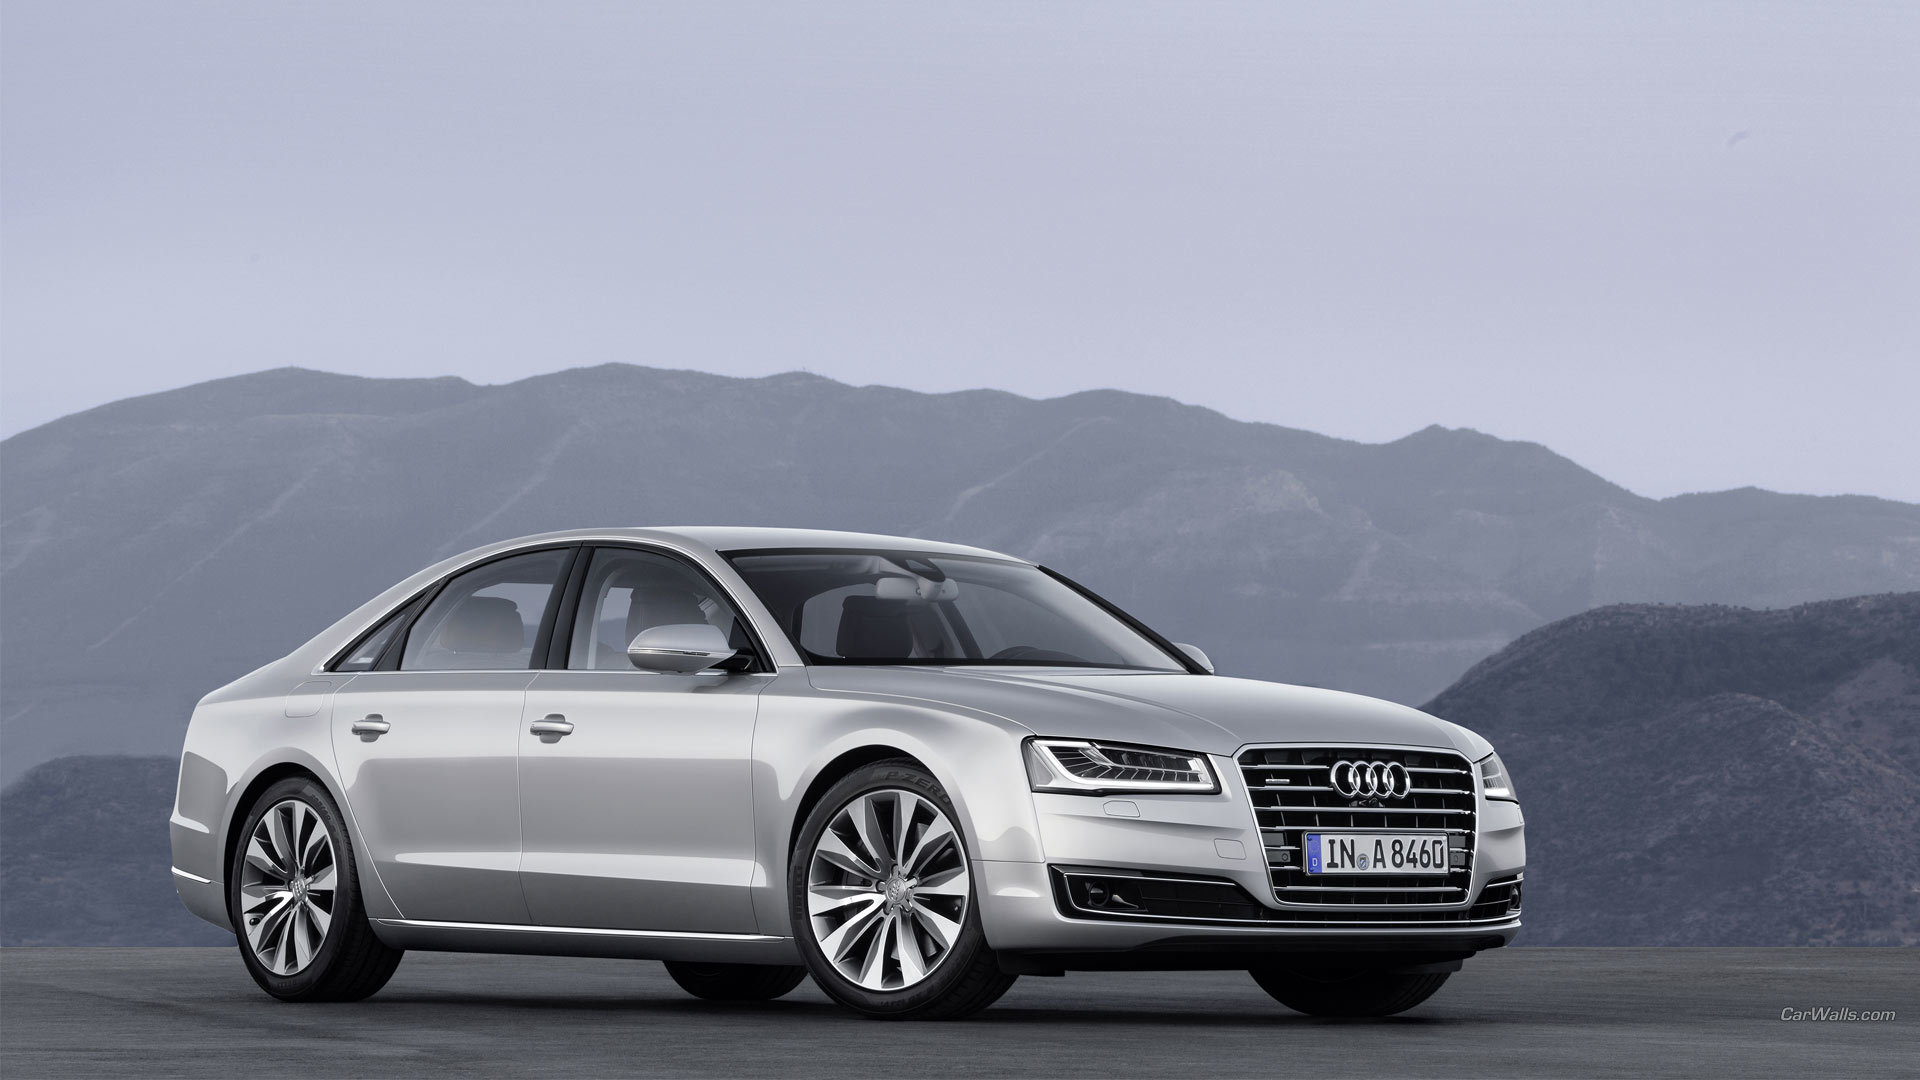 Best Audi A8 wallpaper ID:34227 for High Resolution hd 1920x1080 PC